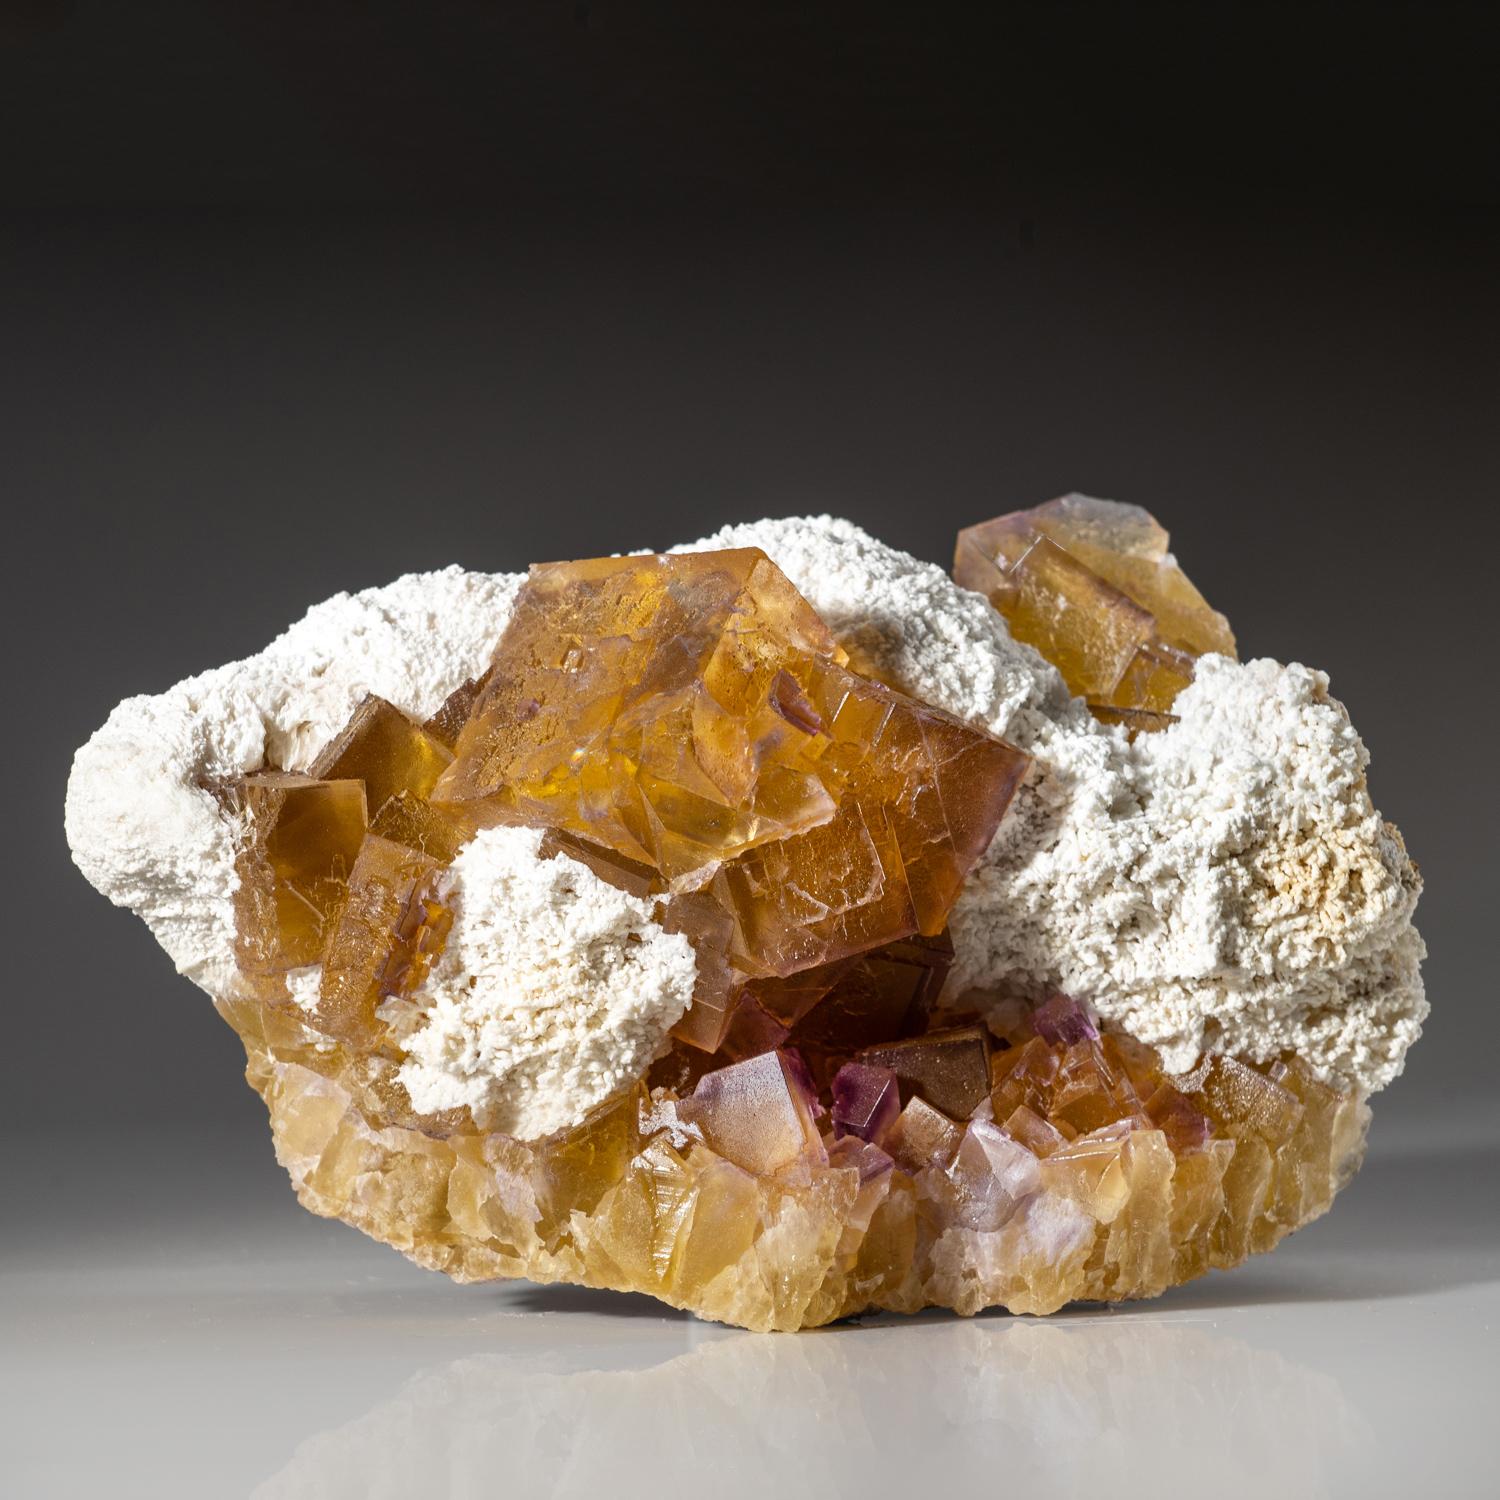 From Elmwood Mine, Carthage, Smith County, Tennessee

Very aesthetic large transparent cubic fluorite crystals with white barite overgrown on yellow fluorite crystals.


Weight: 6.5 lbs, Dimensions: 7 x 6 x 4 inches